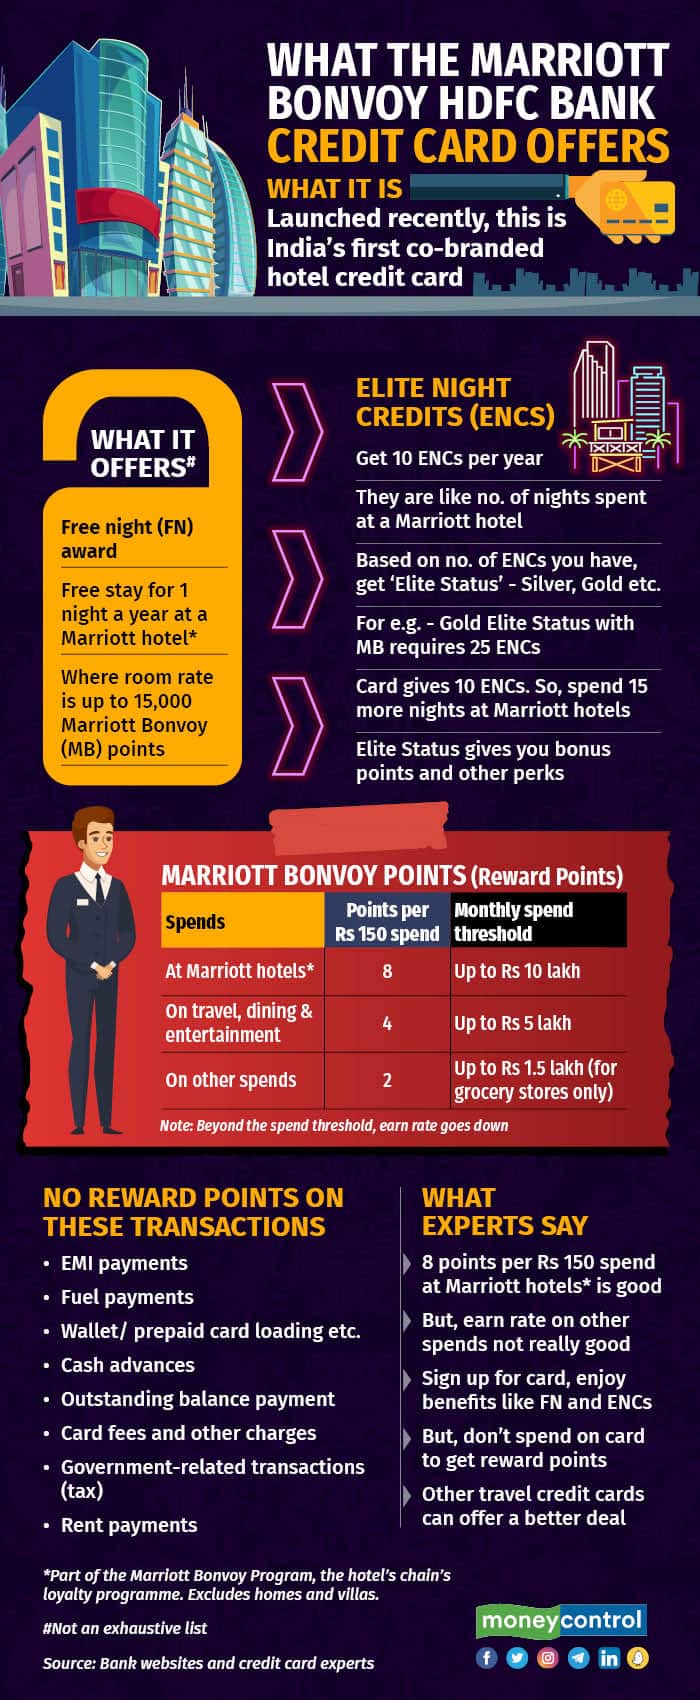 What the Marriott Bonvoy HDFC Bank credit card offers (1)